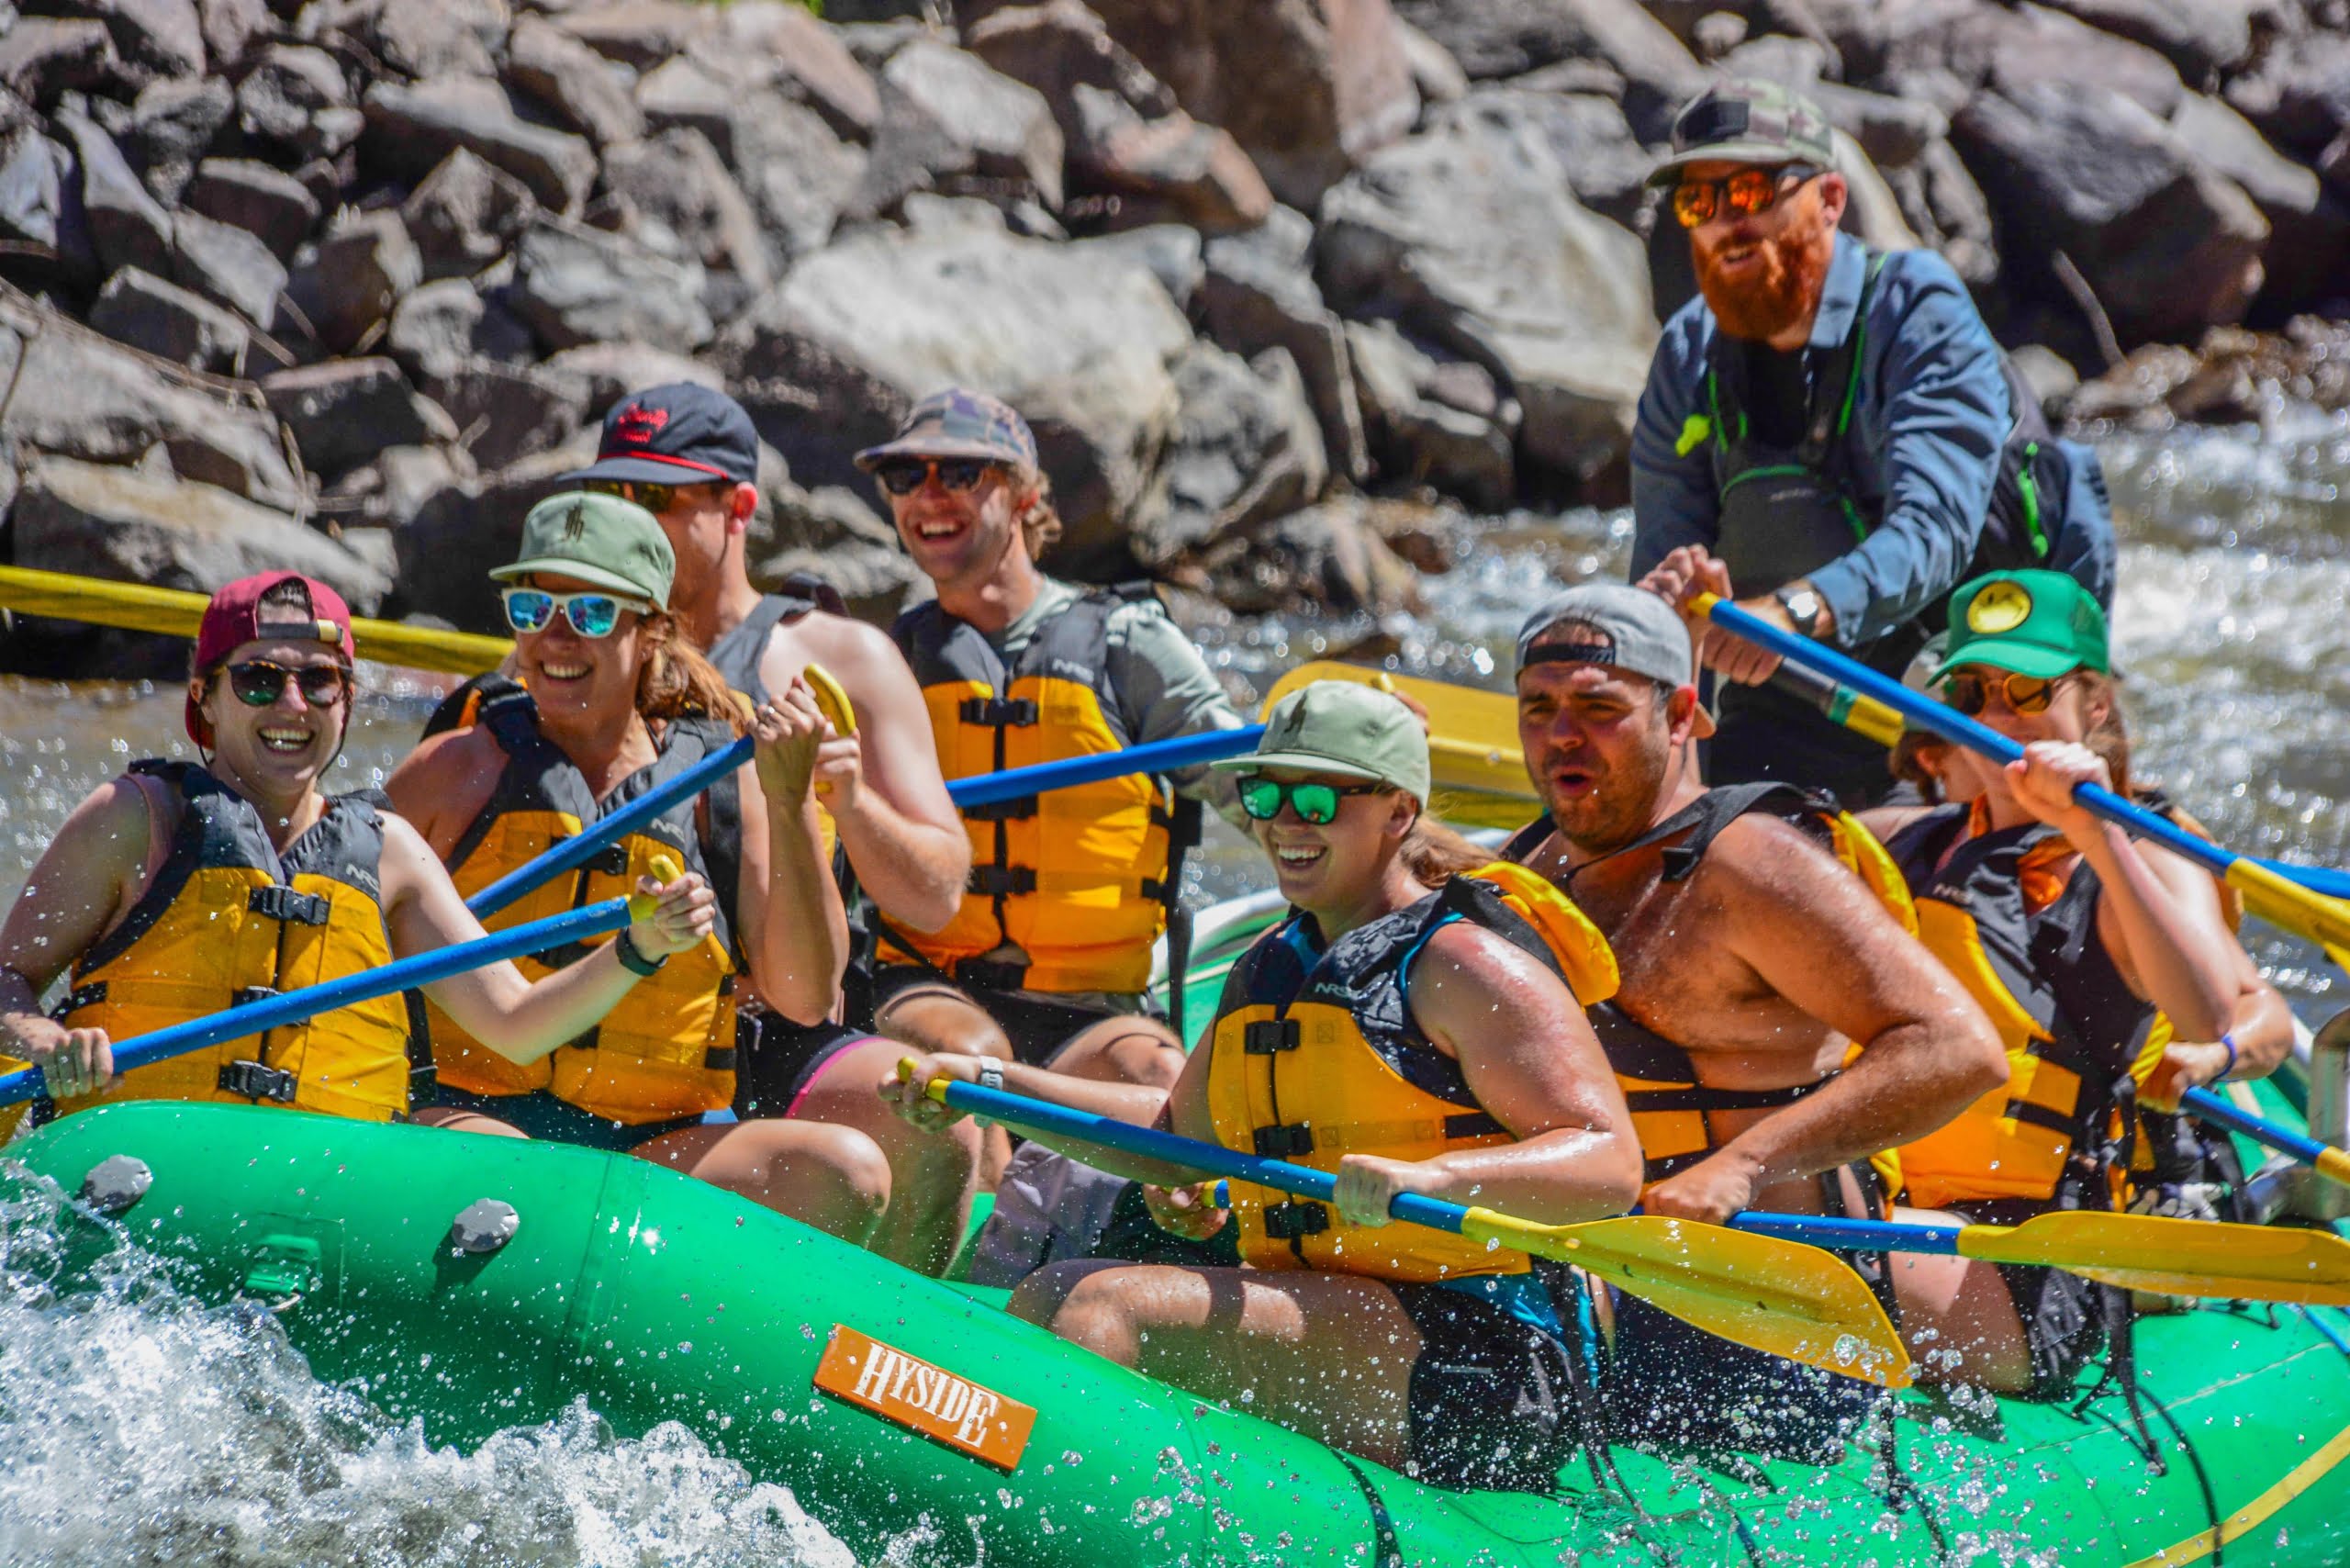 Rafting on the Colorado River